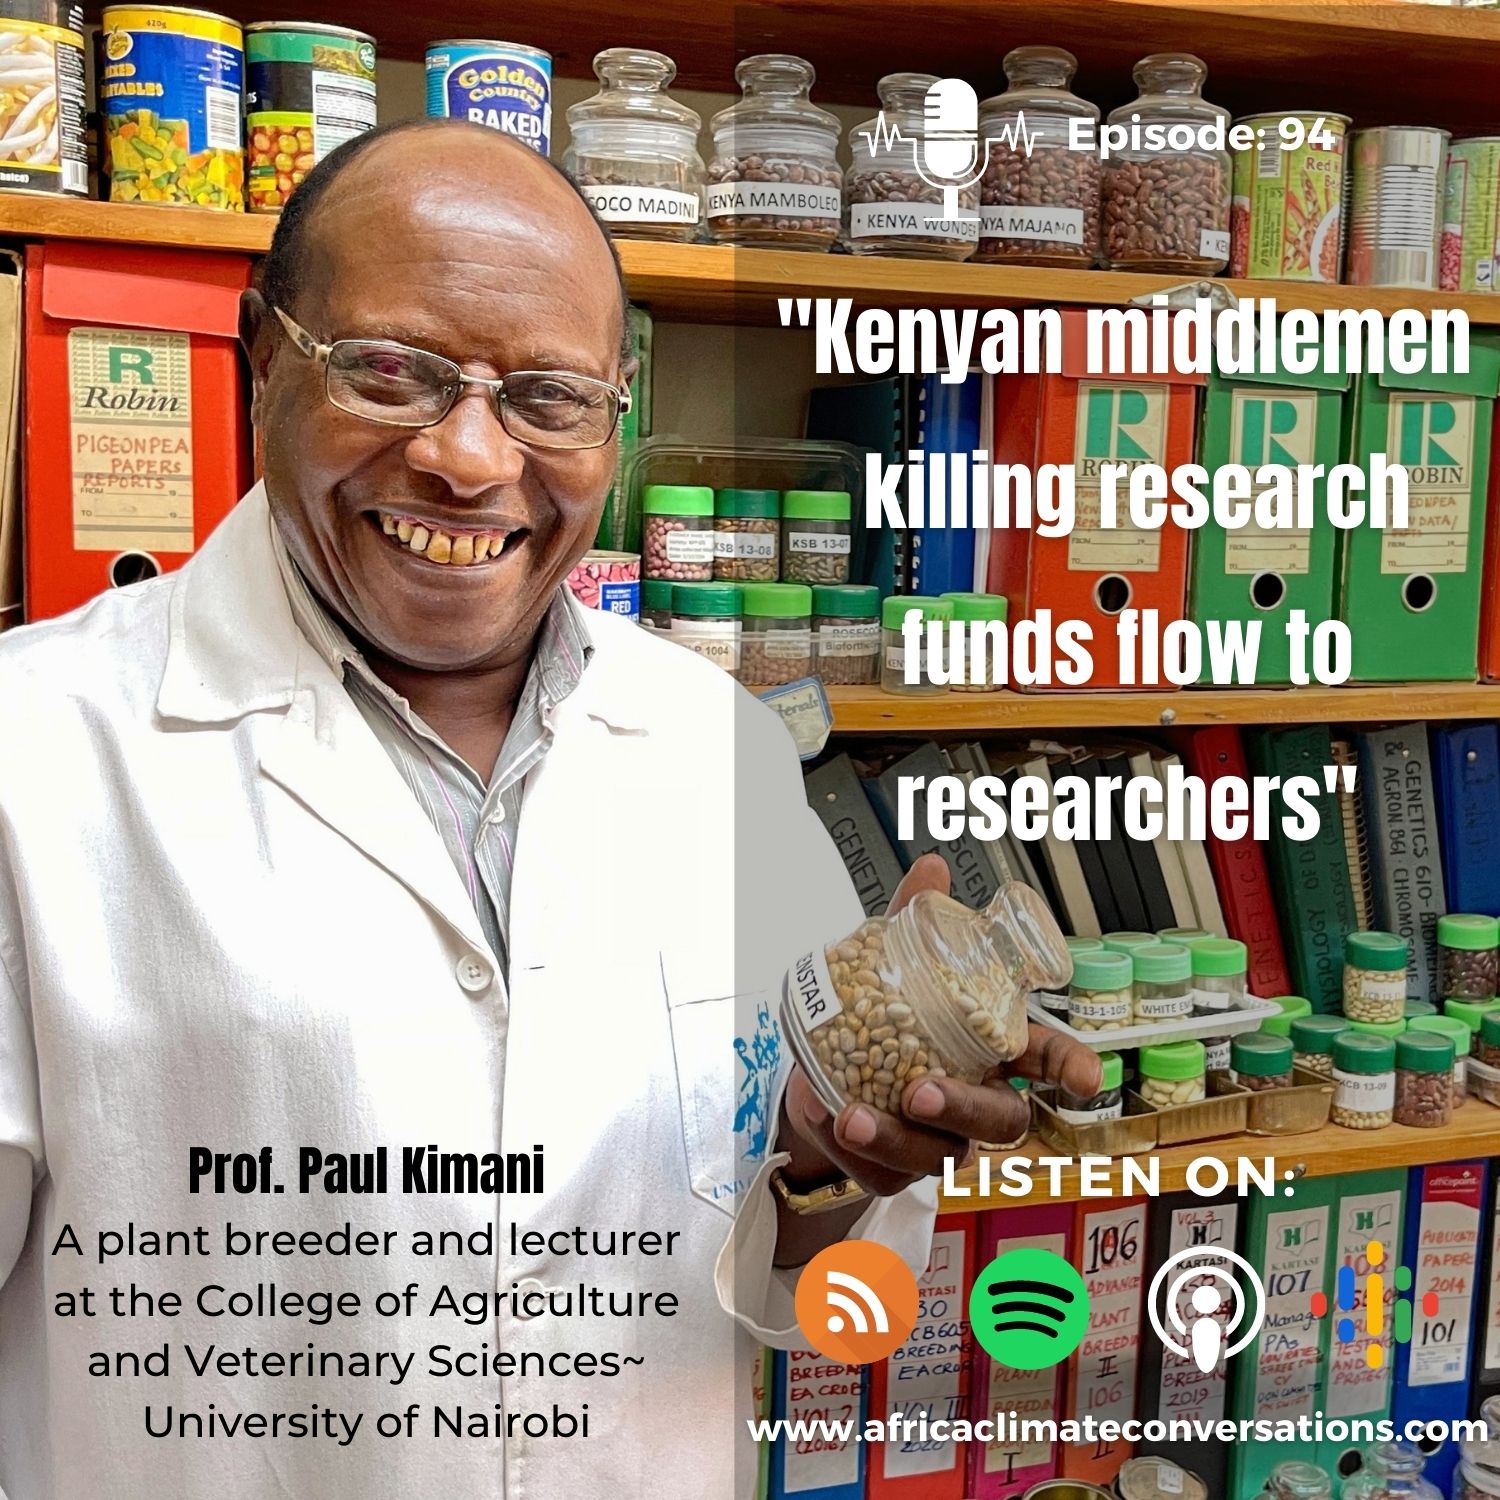 Kenyan middlemen killing research funds flow to researchers.